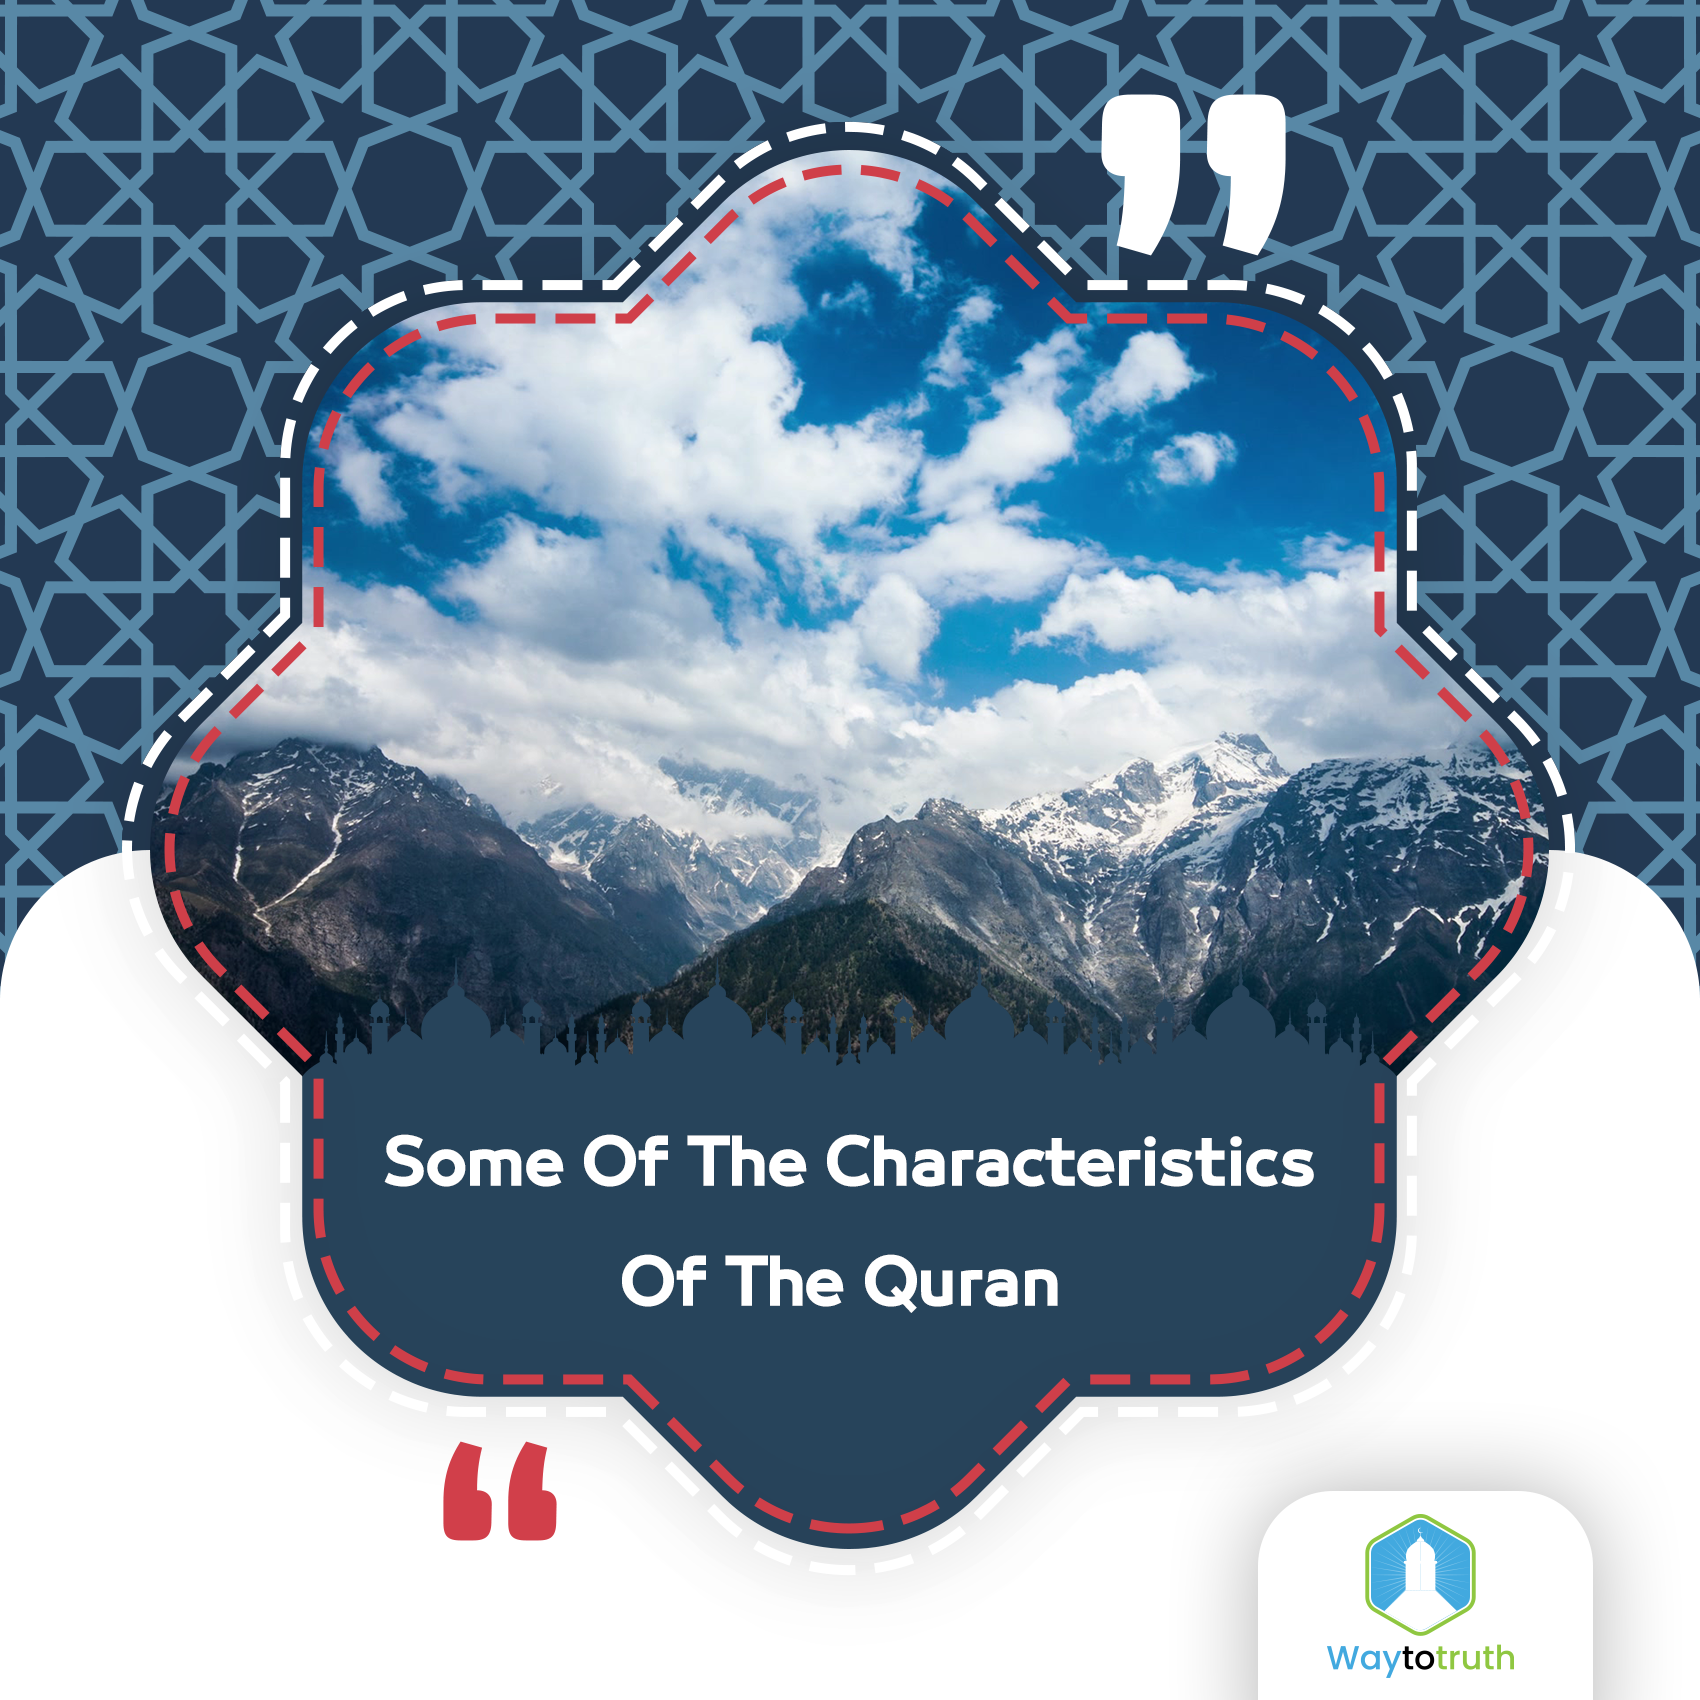 Some of the Characteristics of the Quran